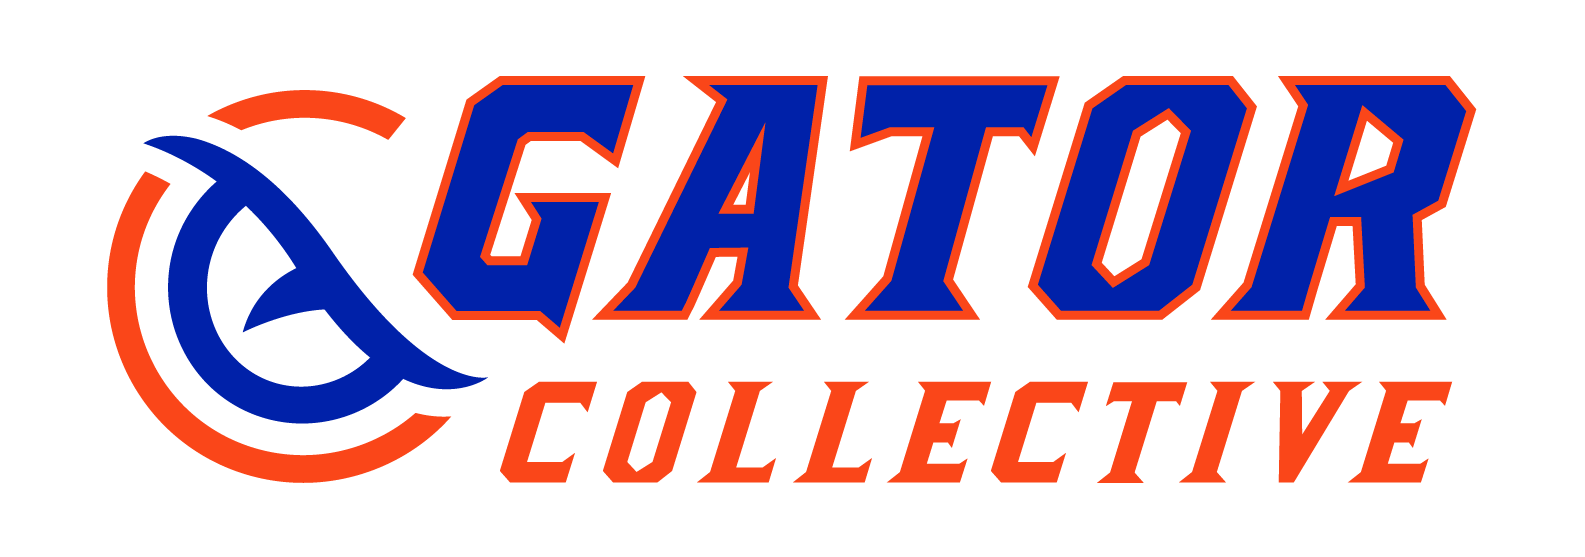 Gator Collective Logo designed by Stingray Branding, an annual event marketed by Stingray Branding